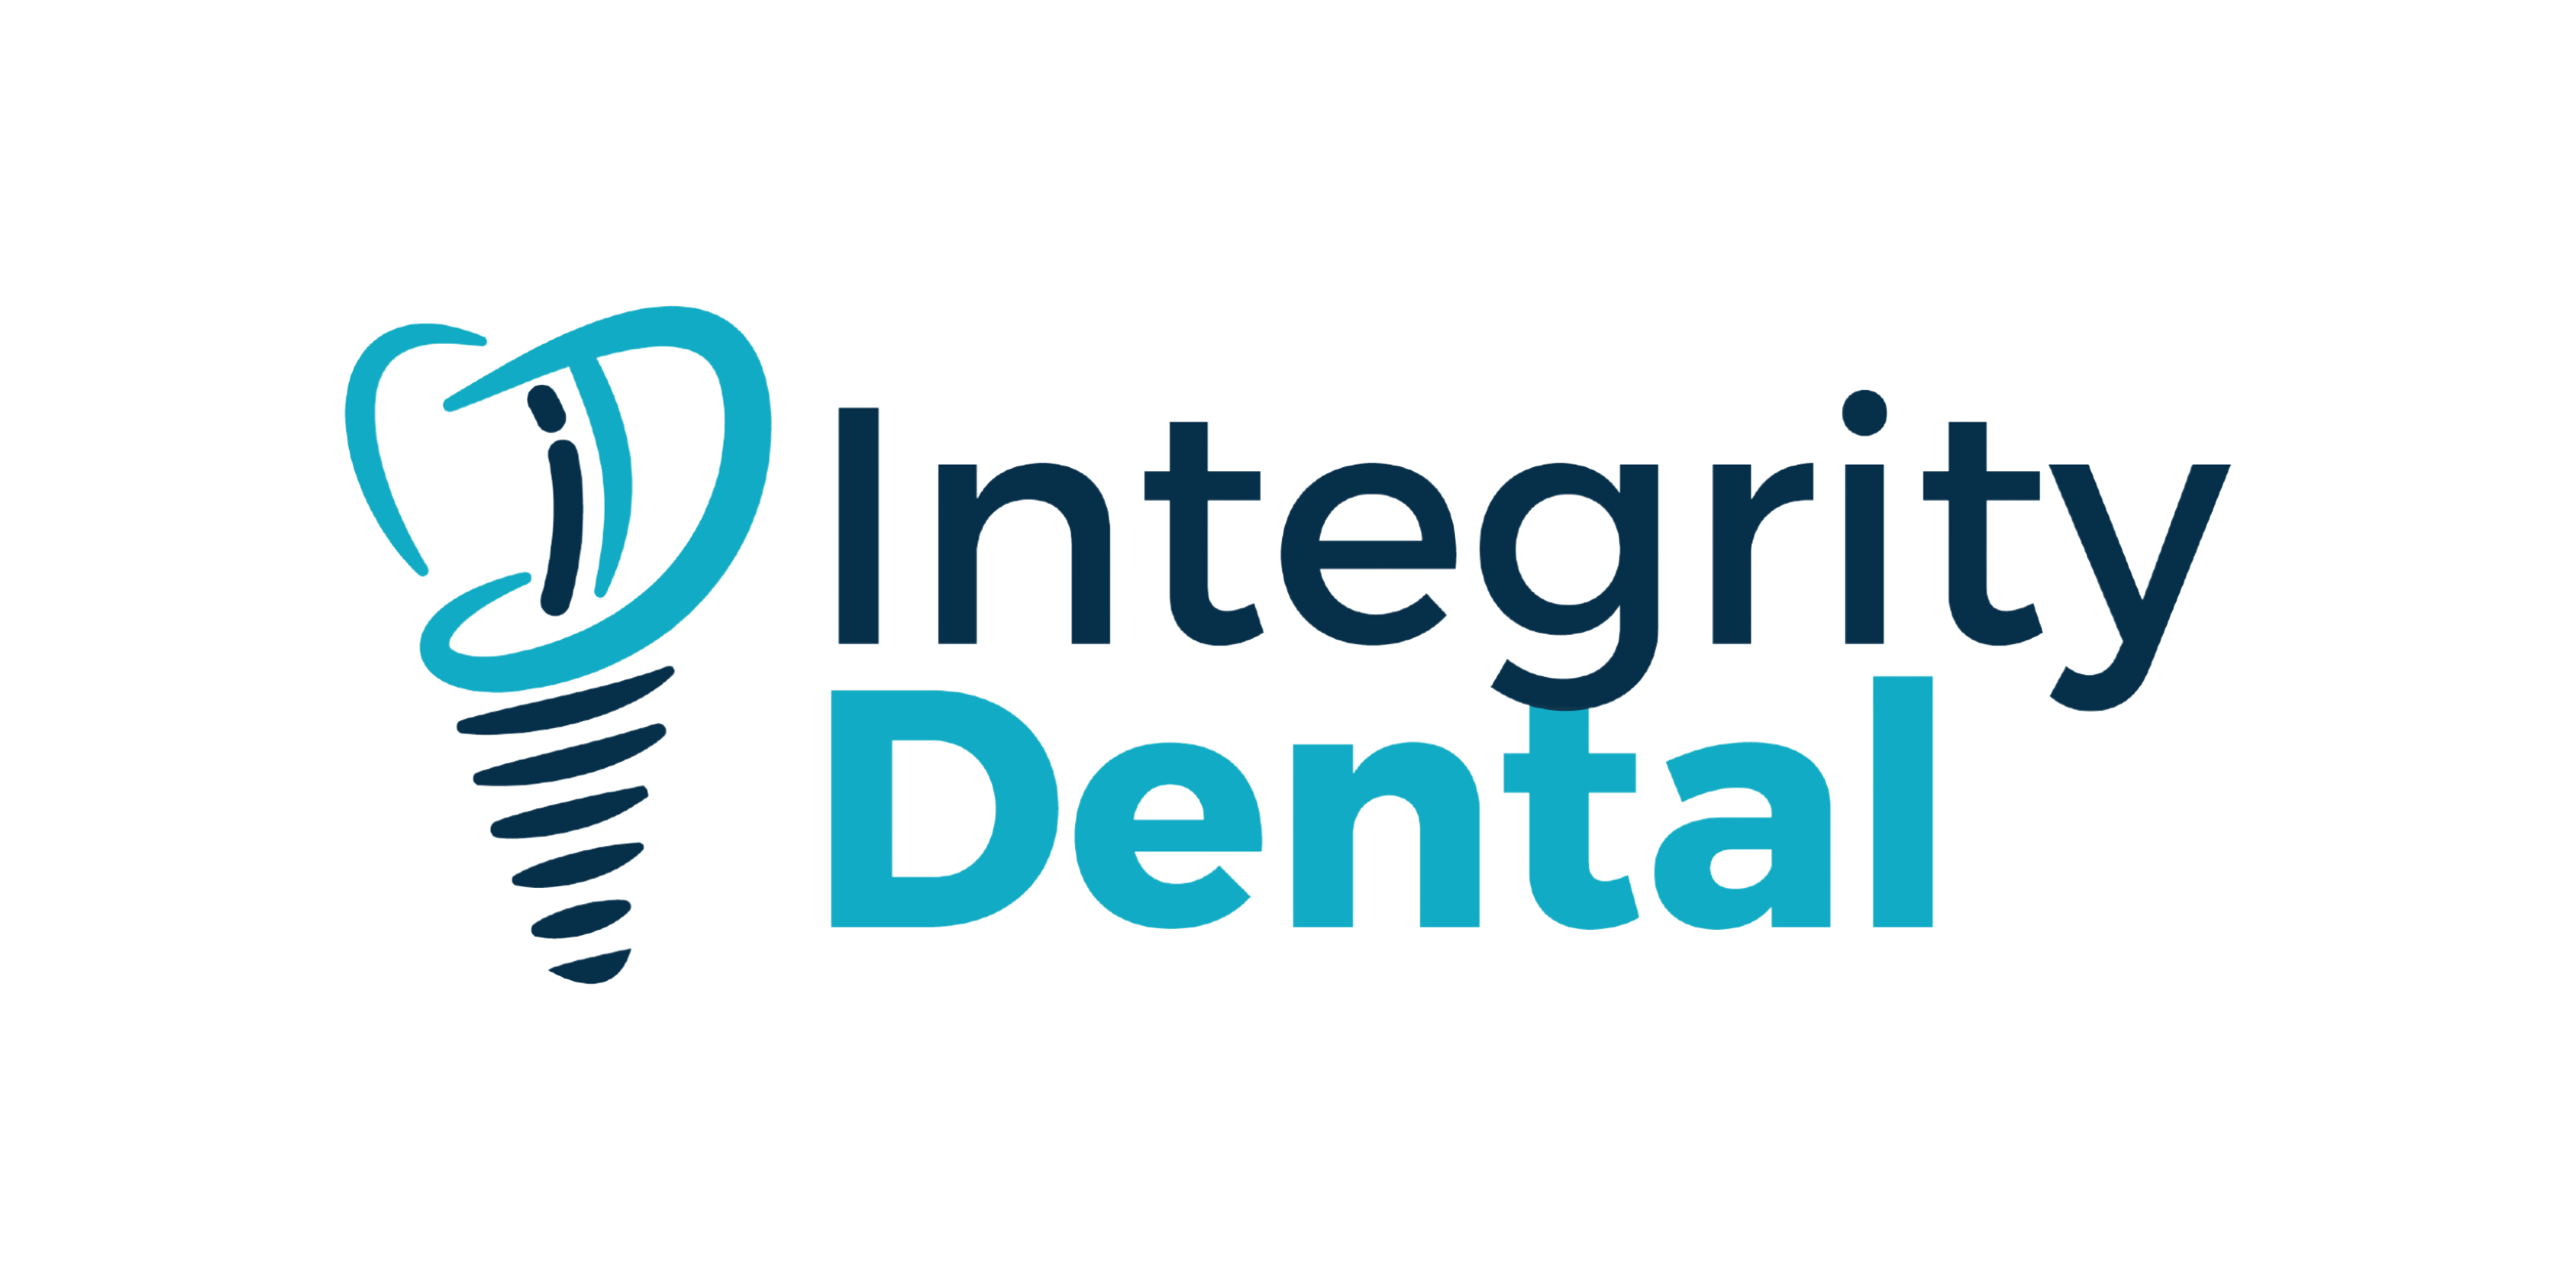 Teeth Cleaning Exam, Cosmetic Dentist & Dentistry in Greenville SC